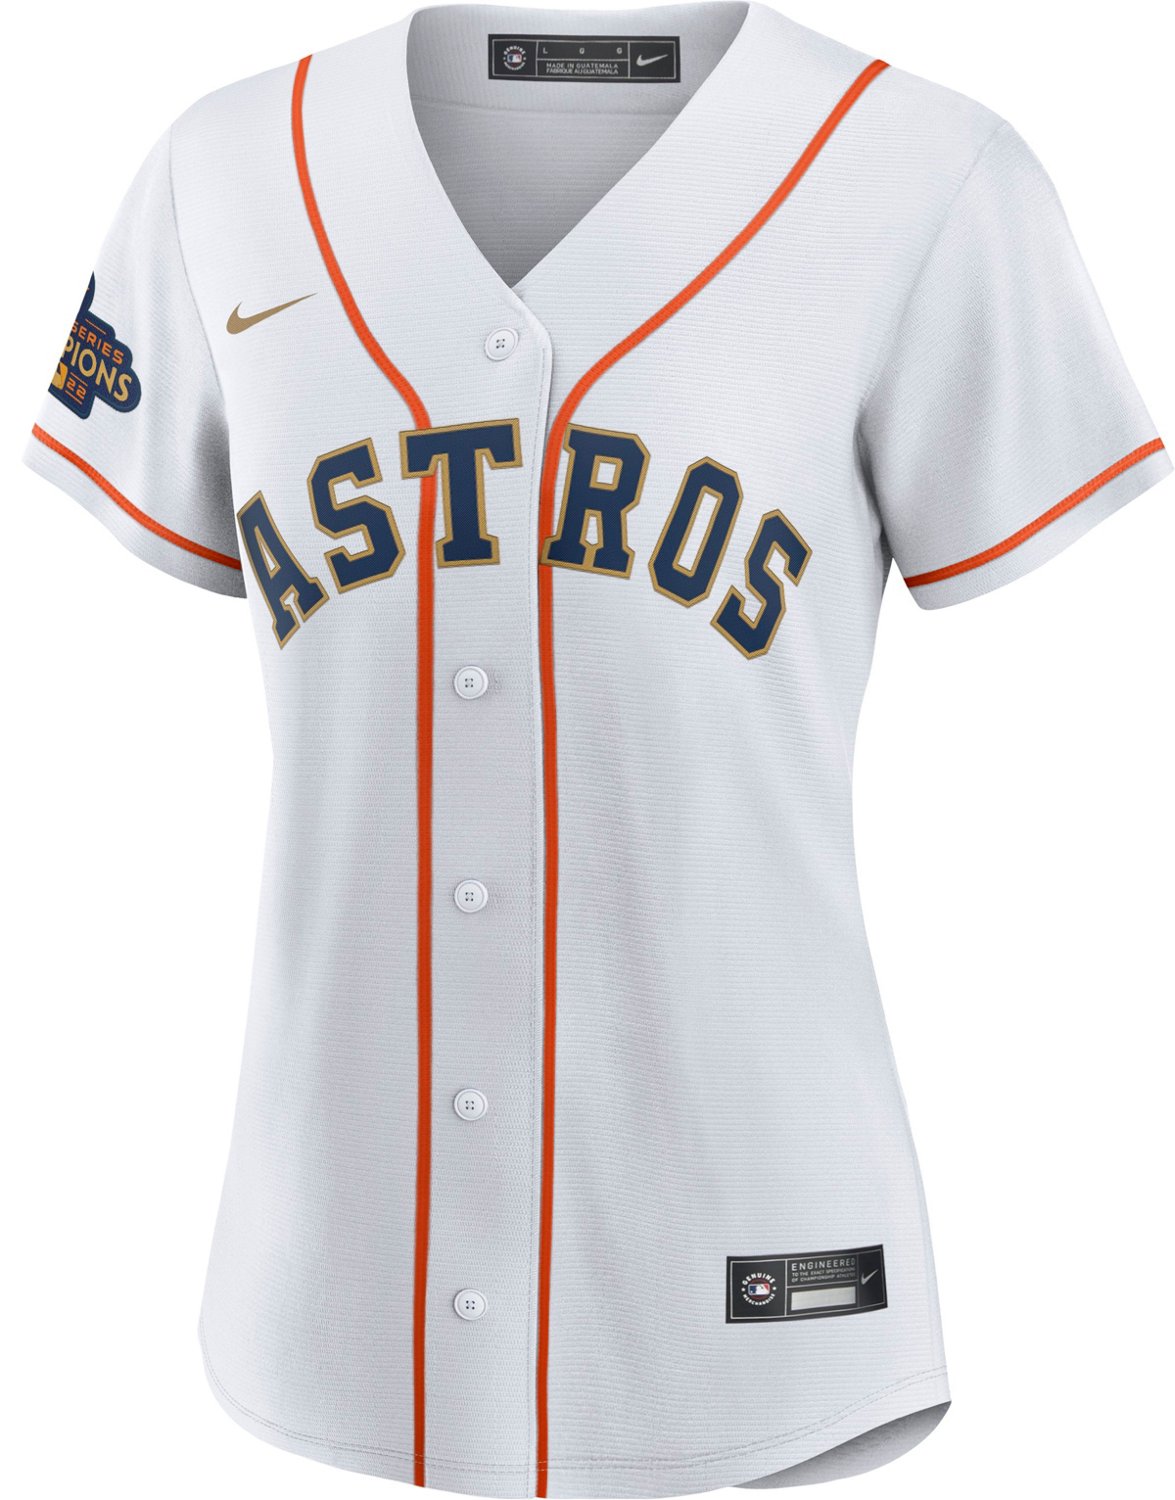 Academy to sell Astros Gold Rush uniforms, championship